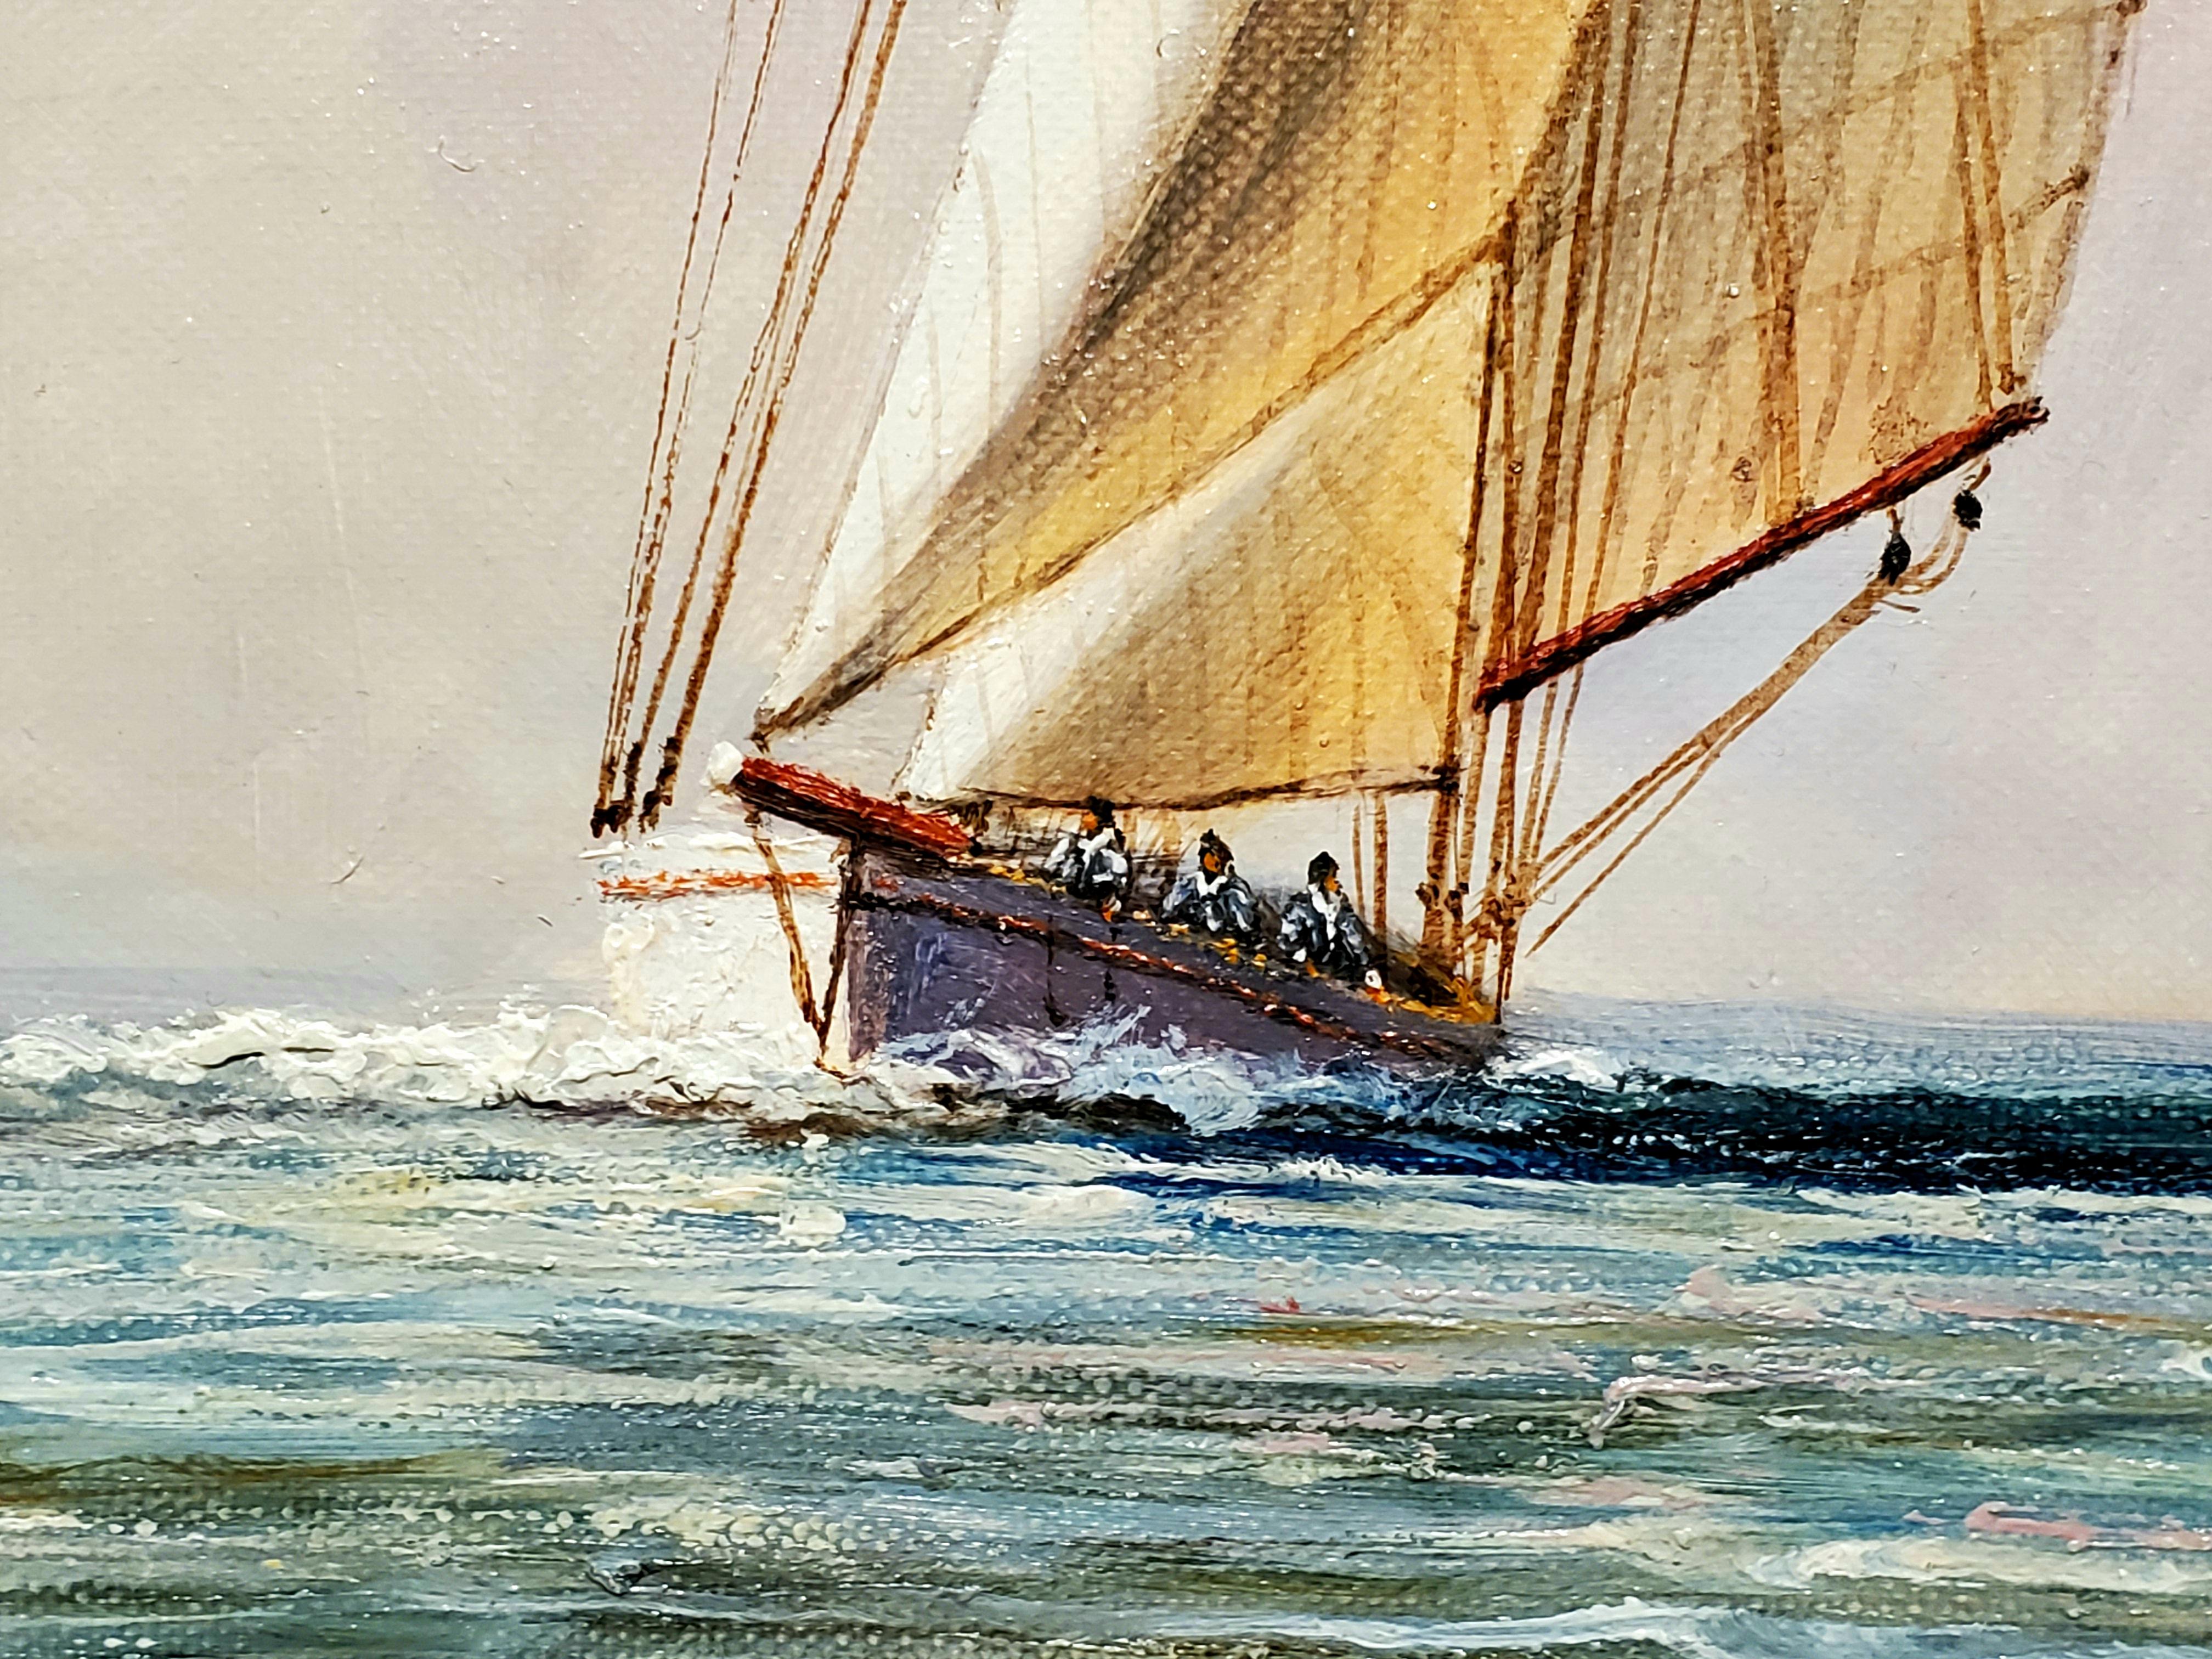 Wide Maritime Landscape Painting of 3 Sailboats At Sea by D. Tayler 7